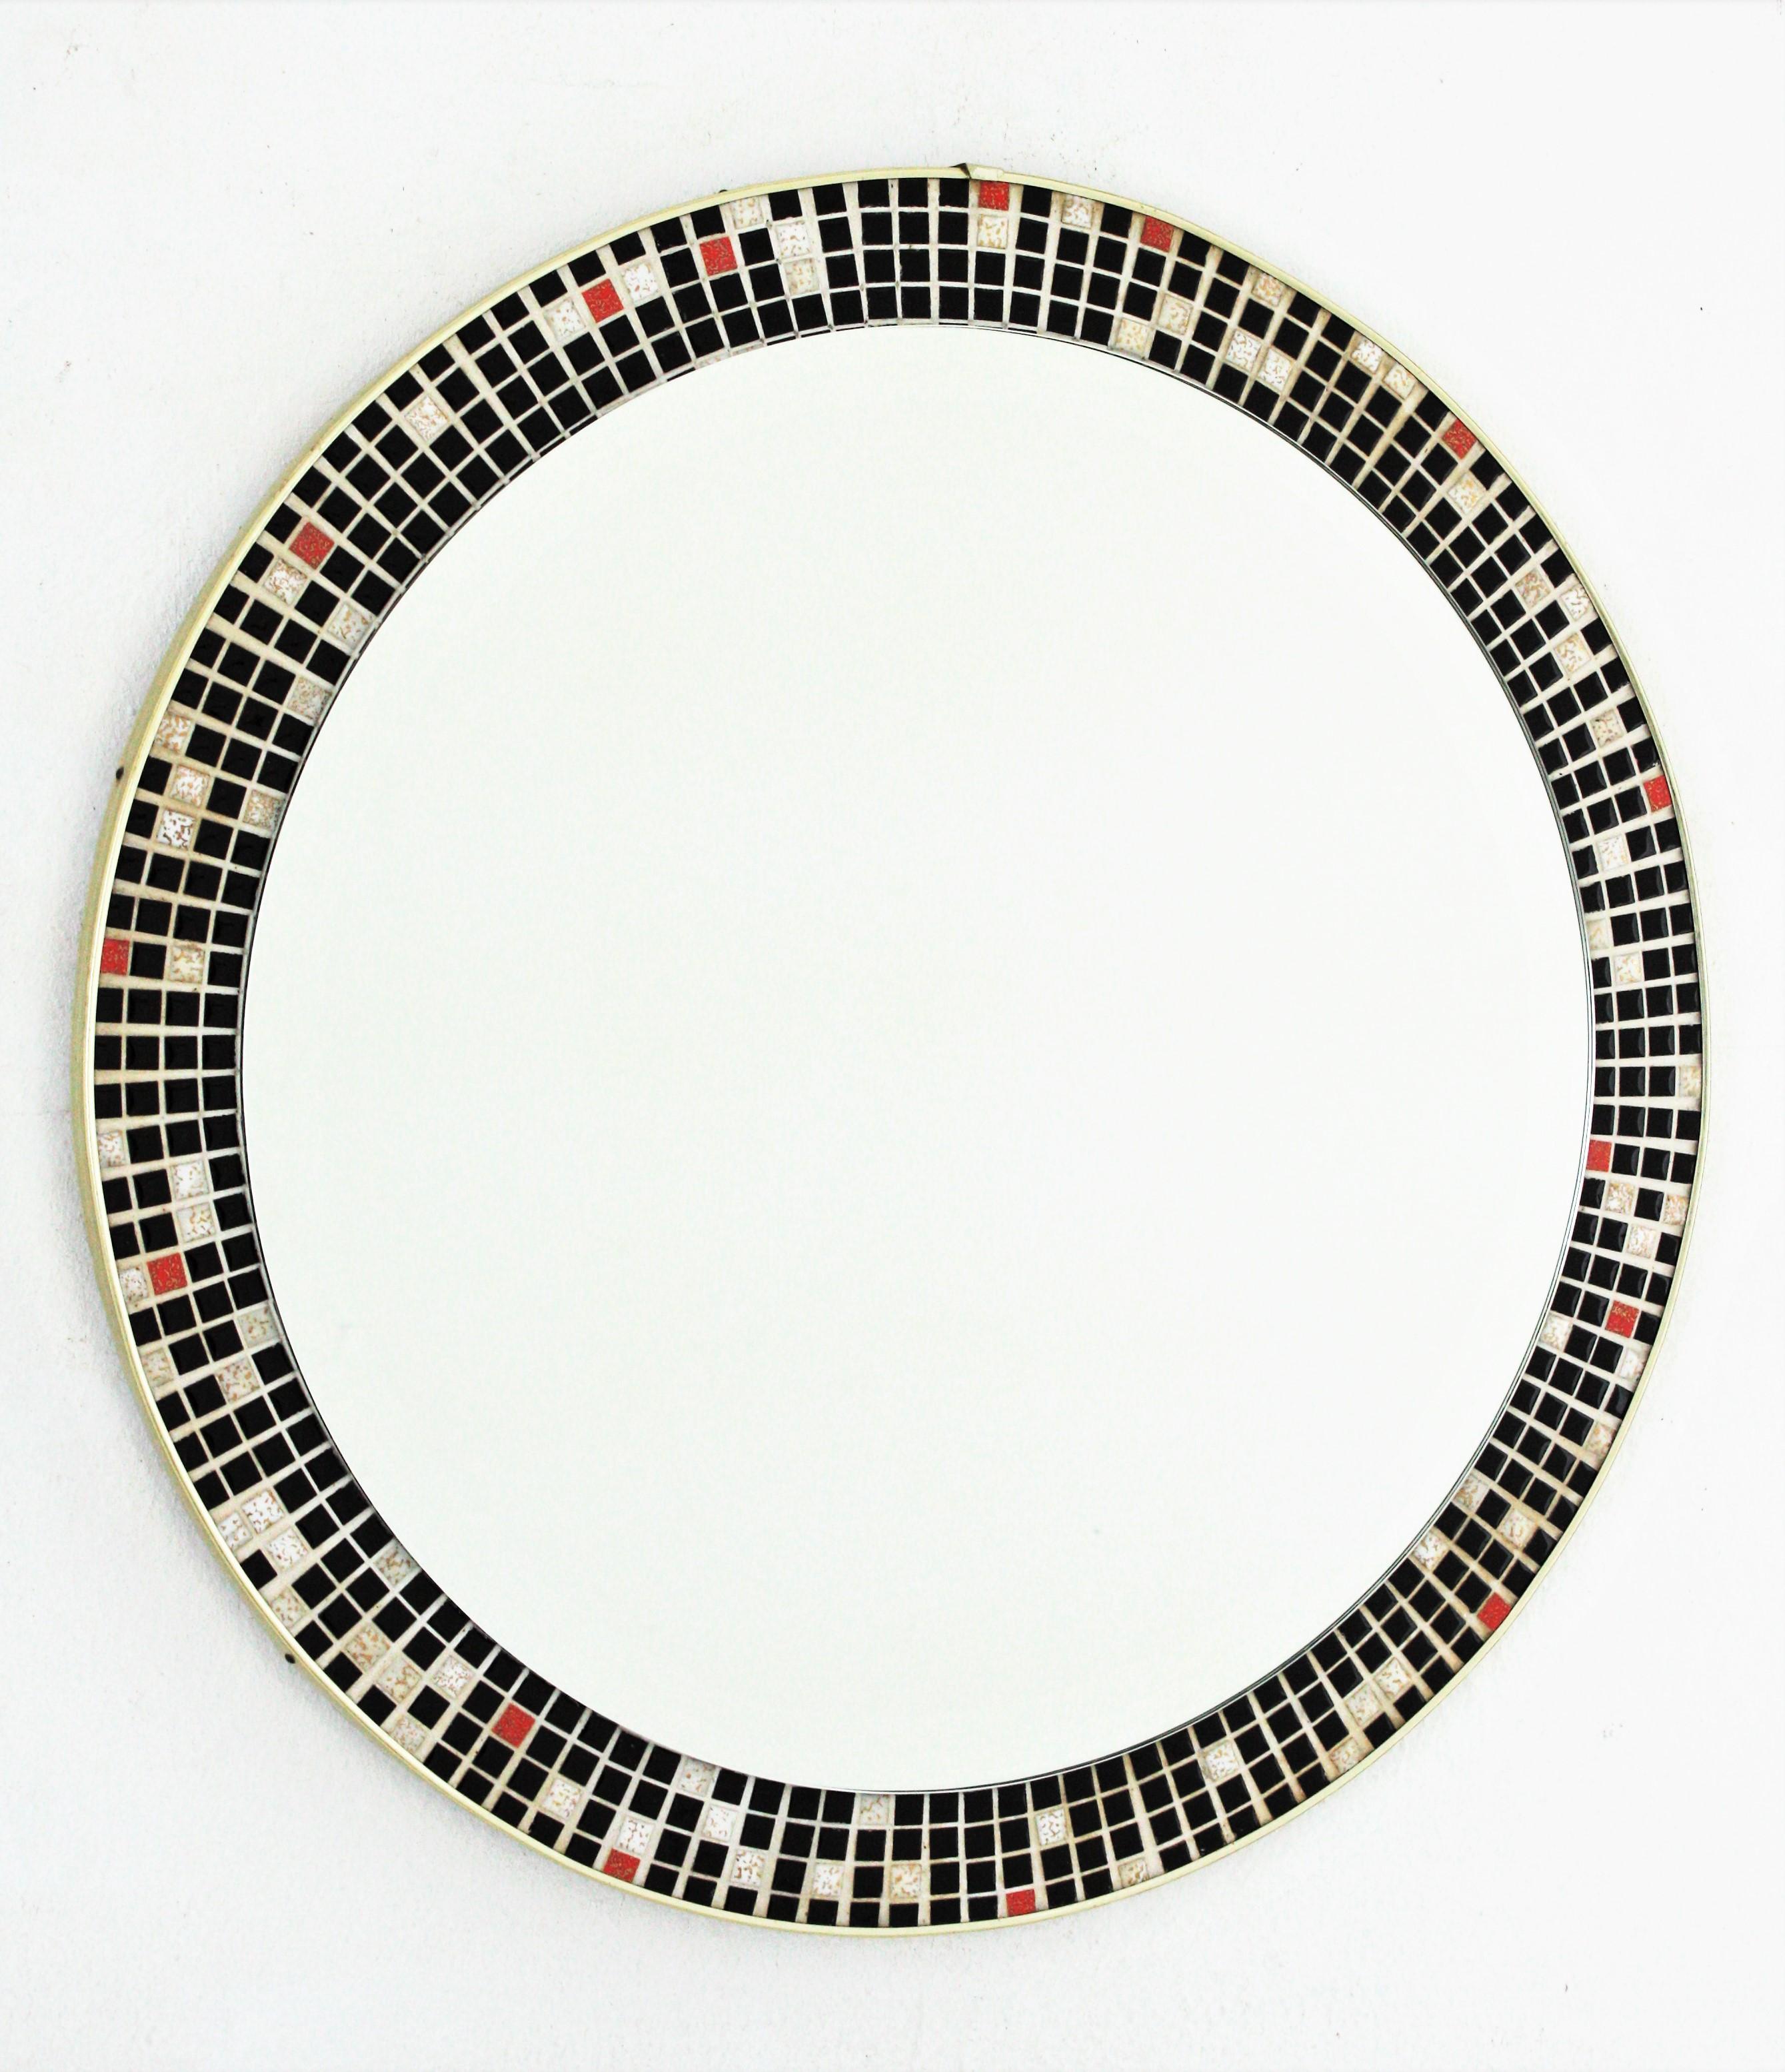 Midcentury Round Wall Mirror with Black and White Tile Mosaic Frame
Beautiful Mid-Century Modern round mirror with ceramic tile mosaic frame, Spain, 1960s.
The mosaic frame is comprised by small ceramic tiles in black color accented by some ones in